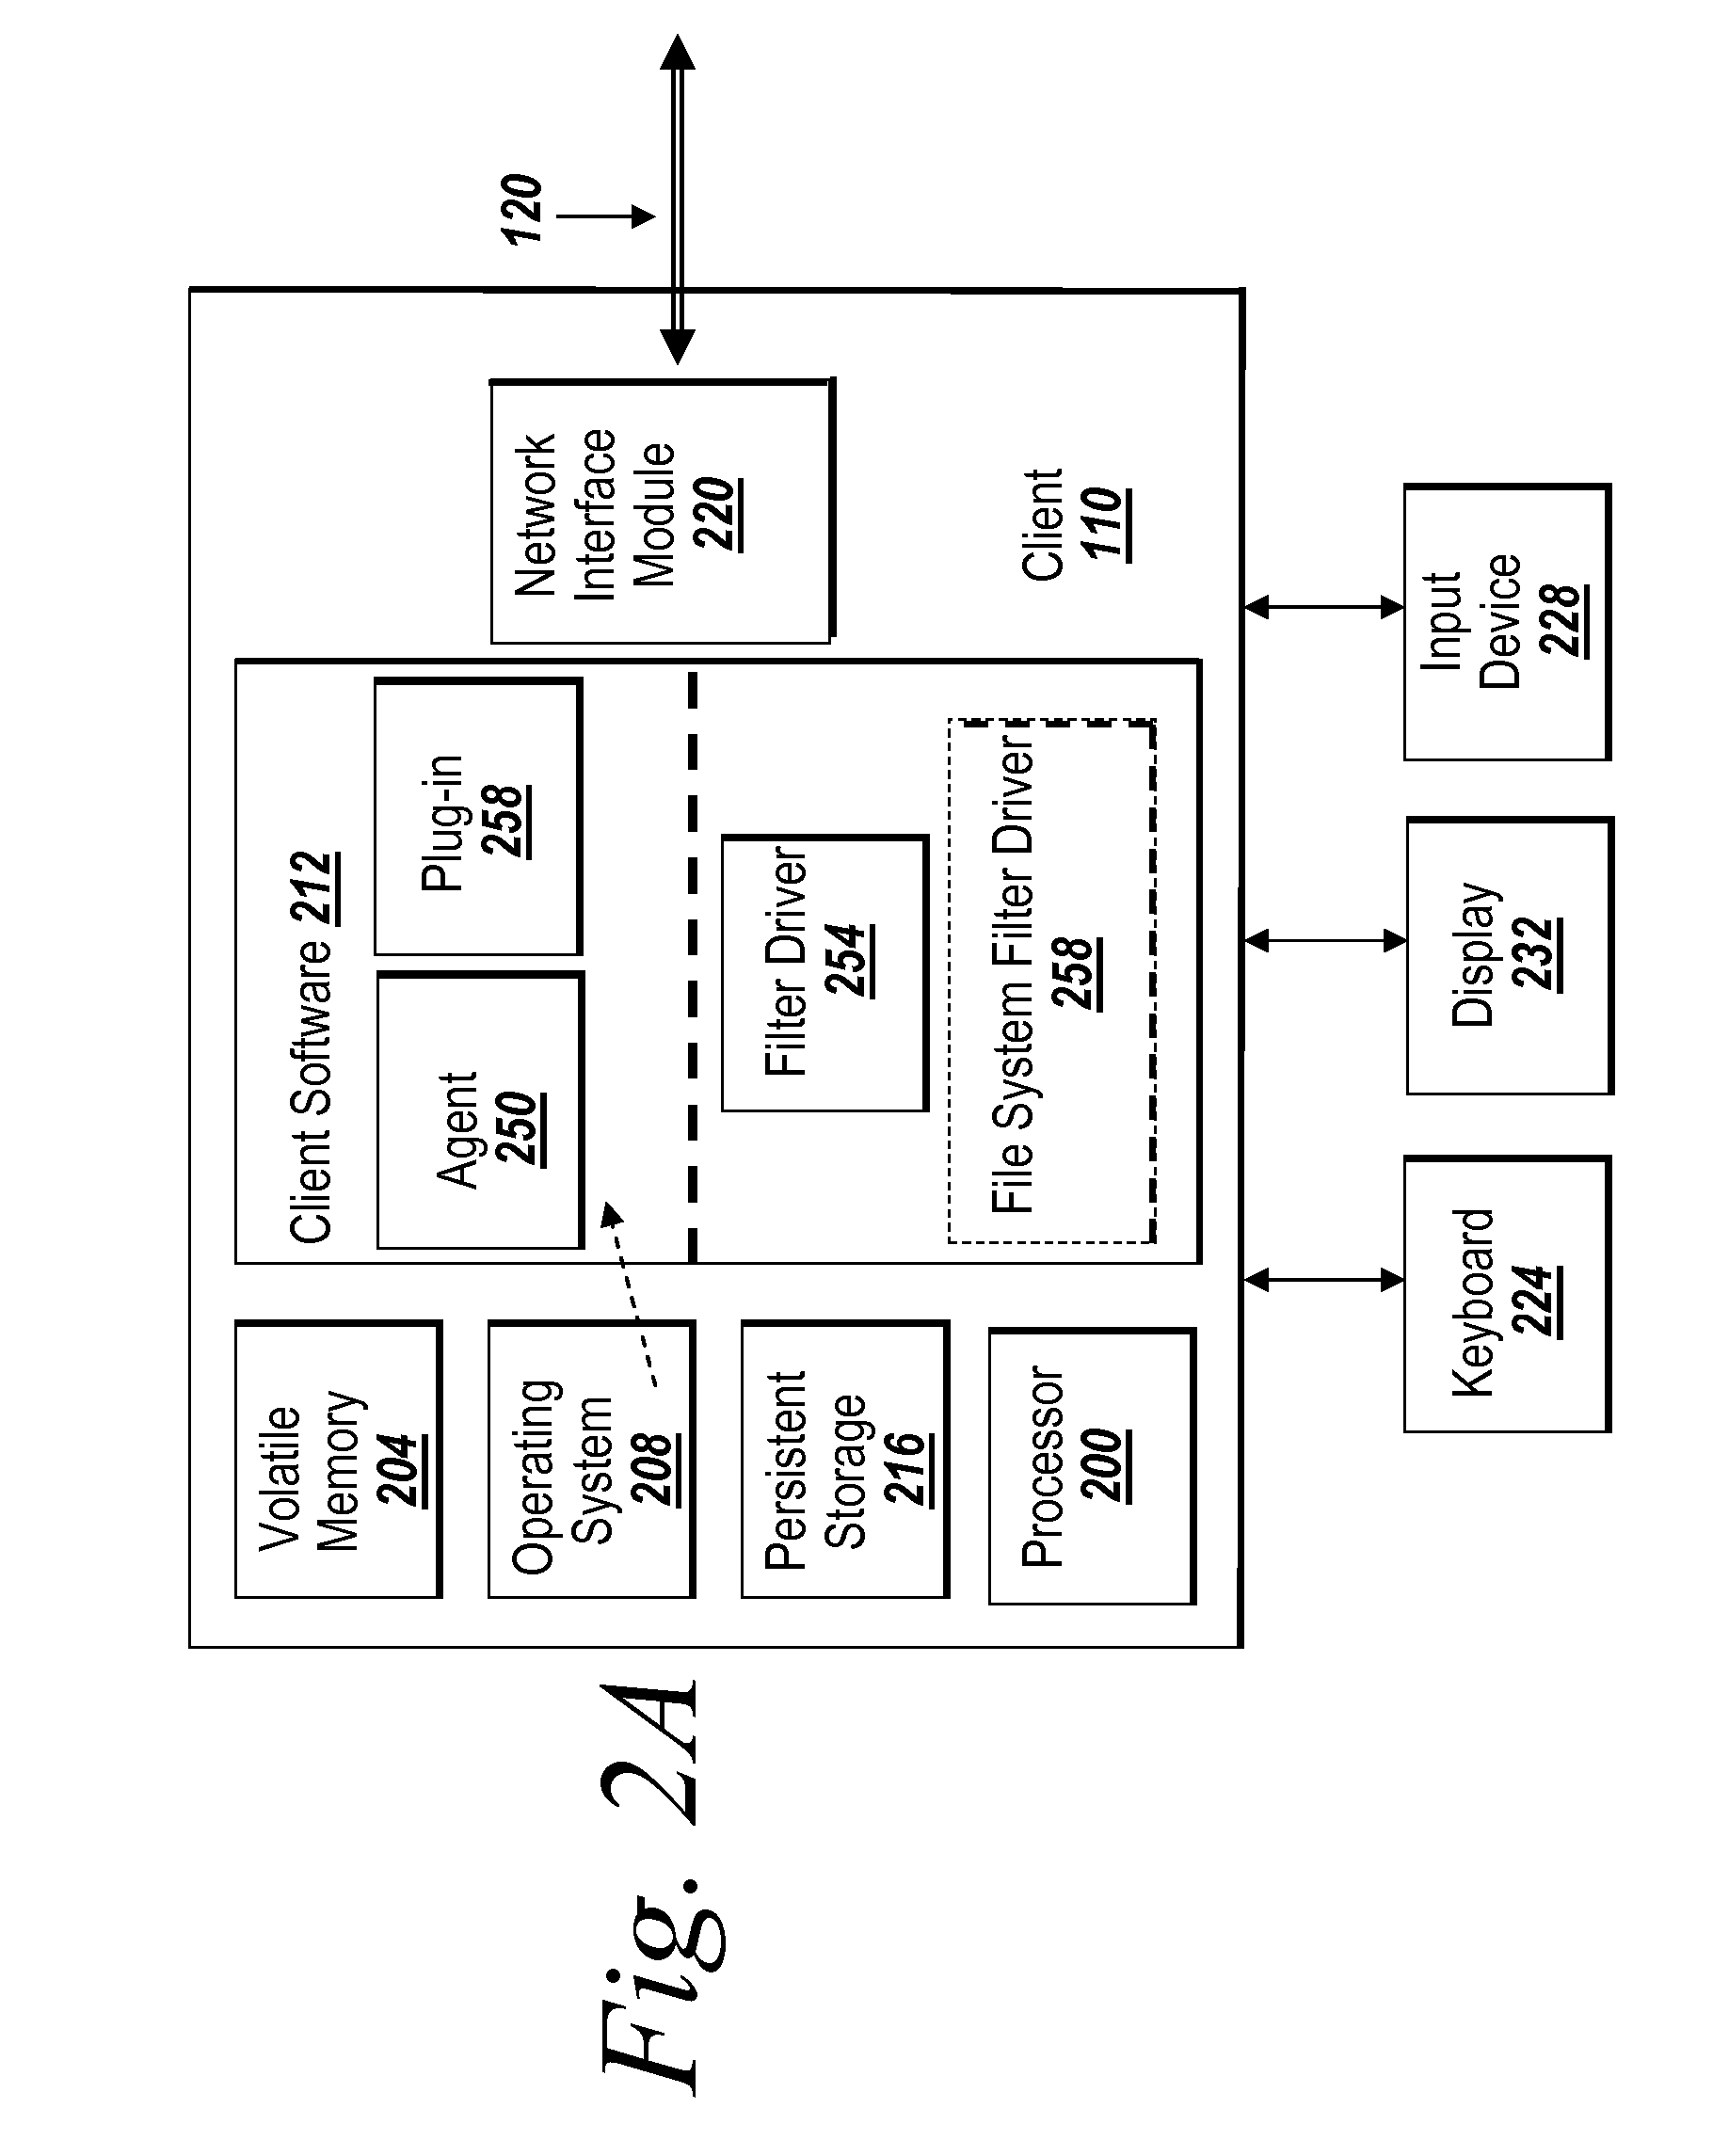 Systems and methods for secure sharing of information